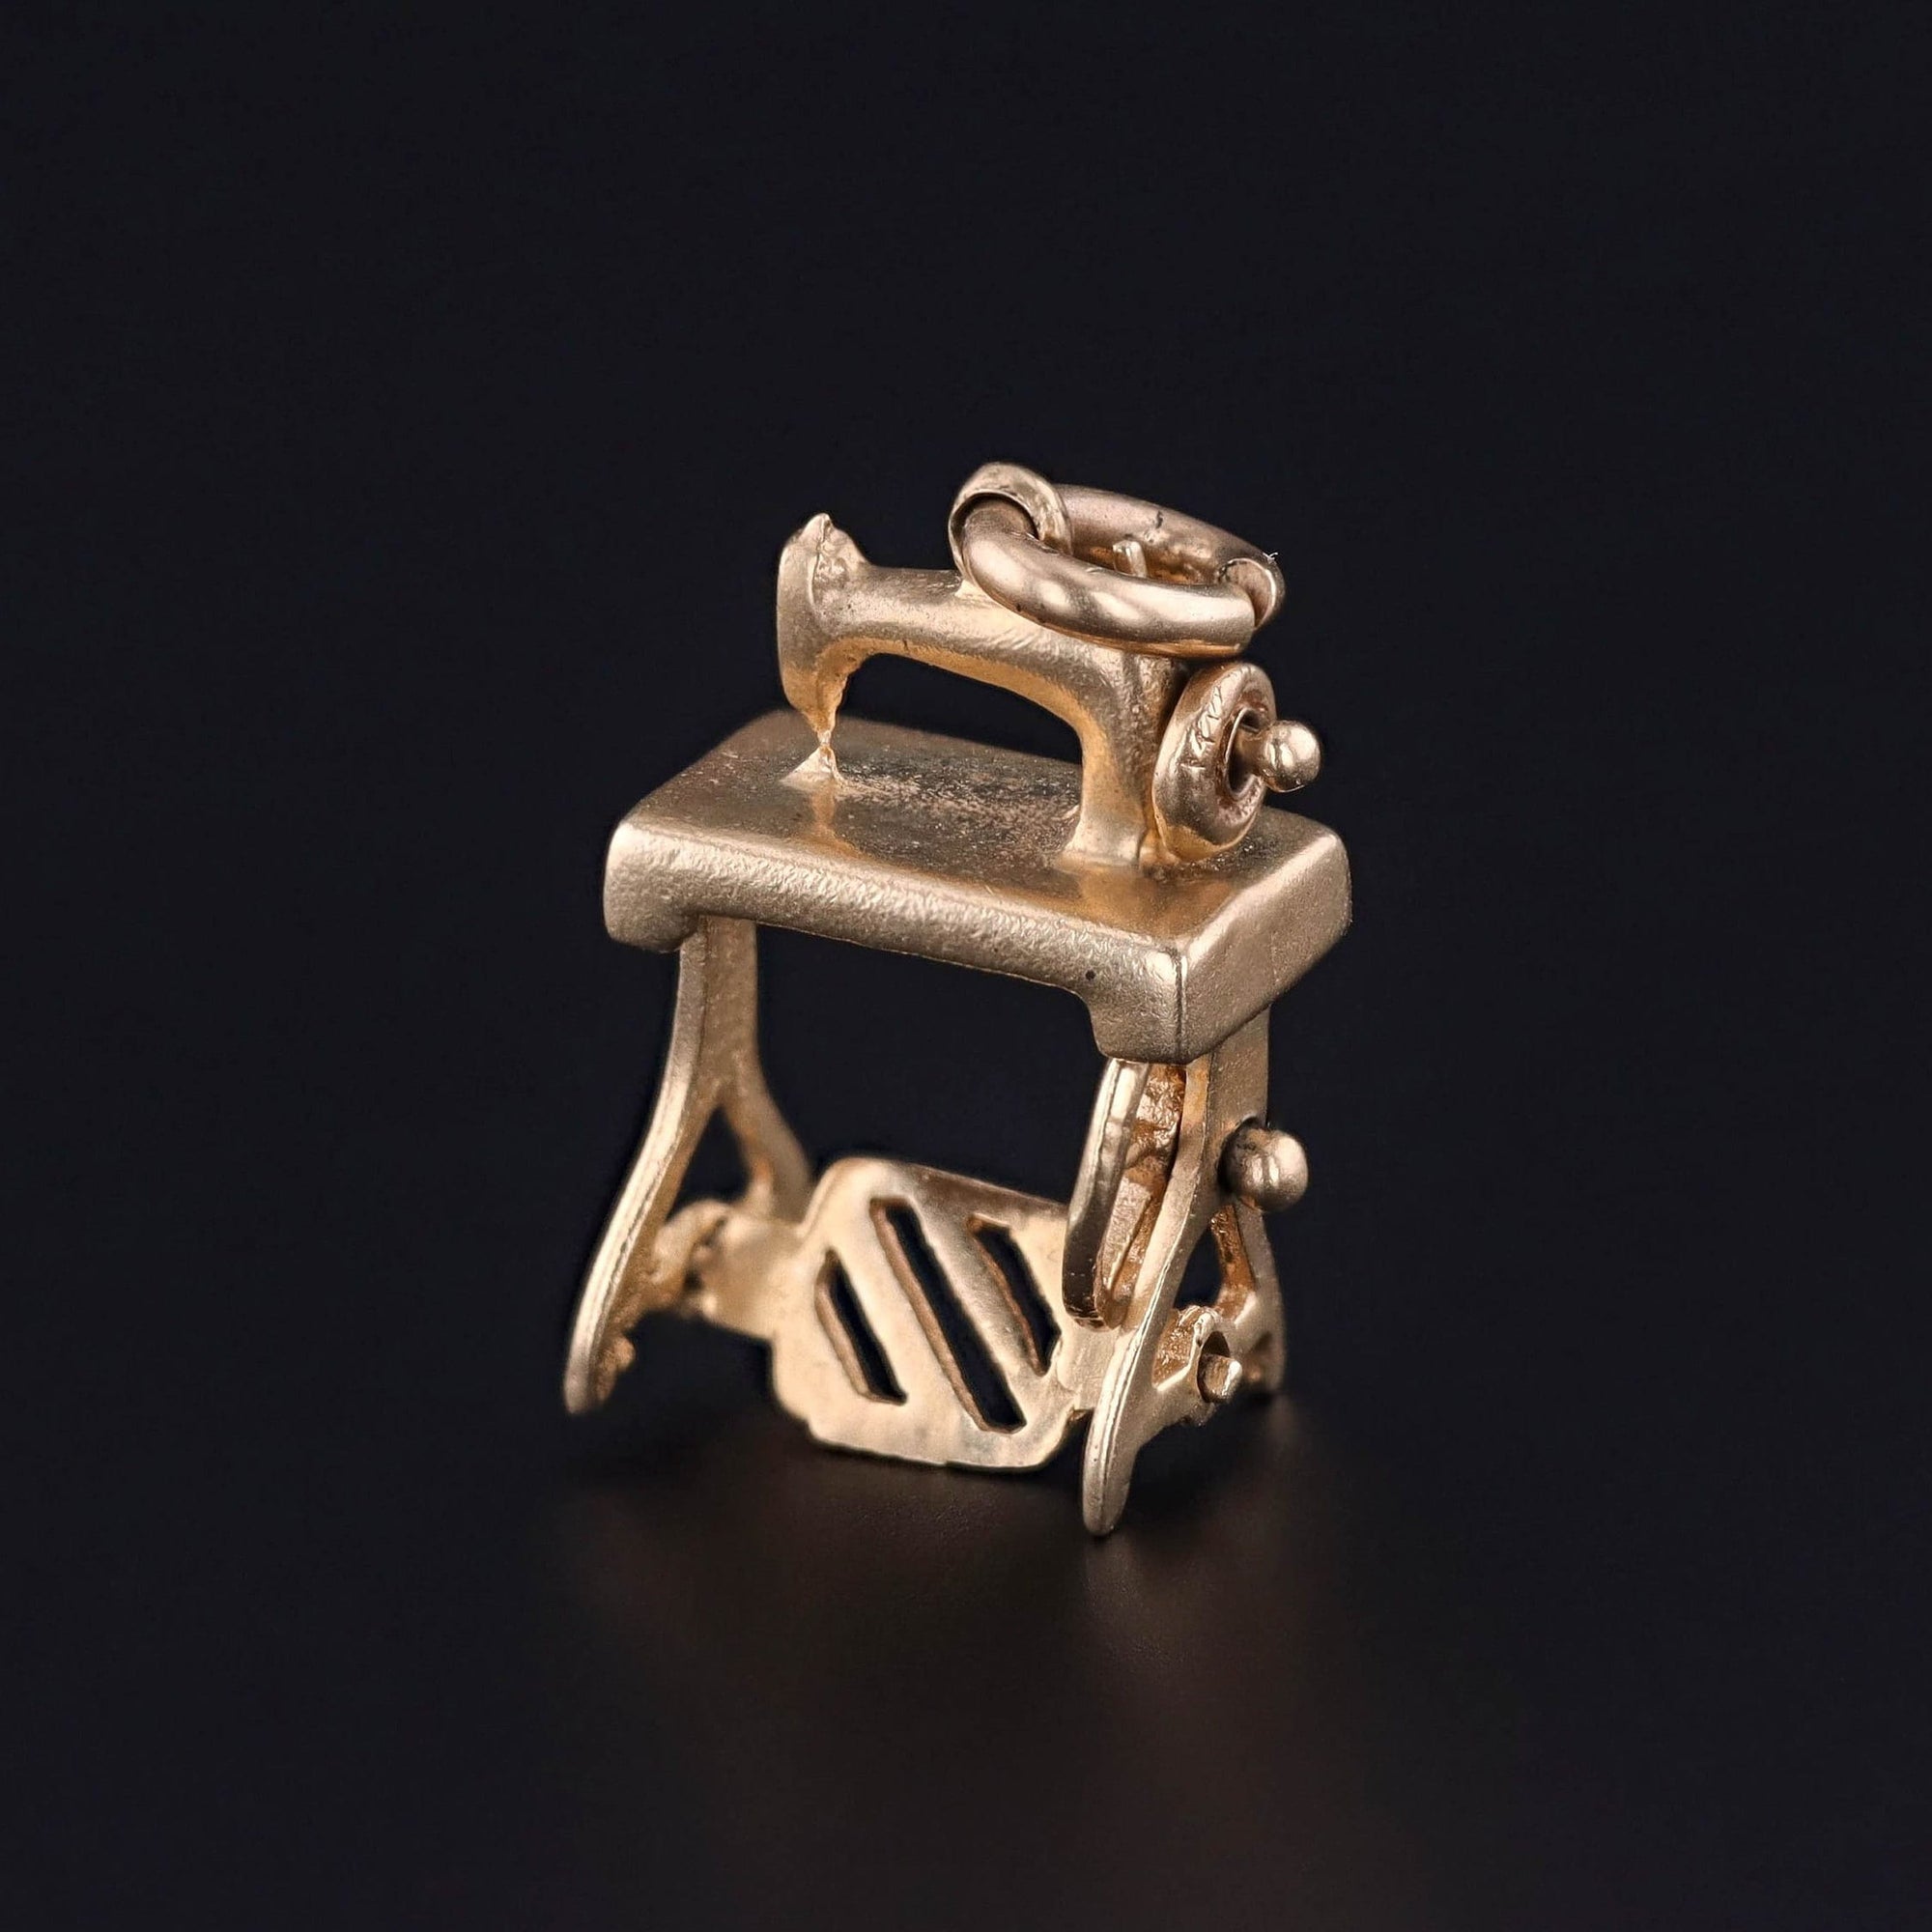 Vintage Moveable Sewing Machine Charm of 14k Gold